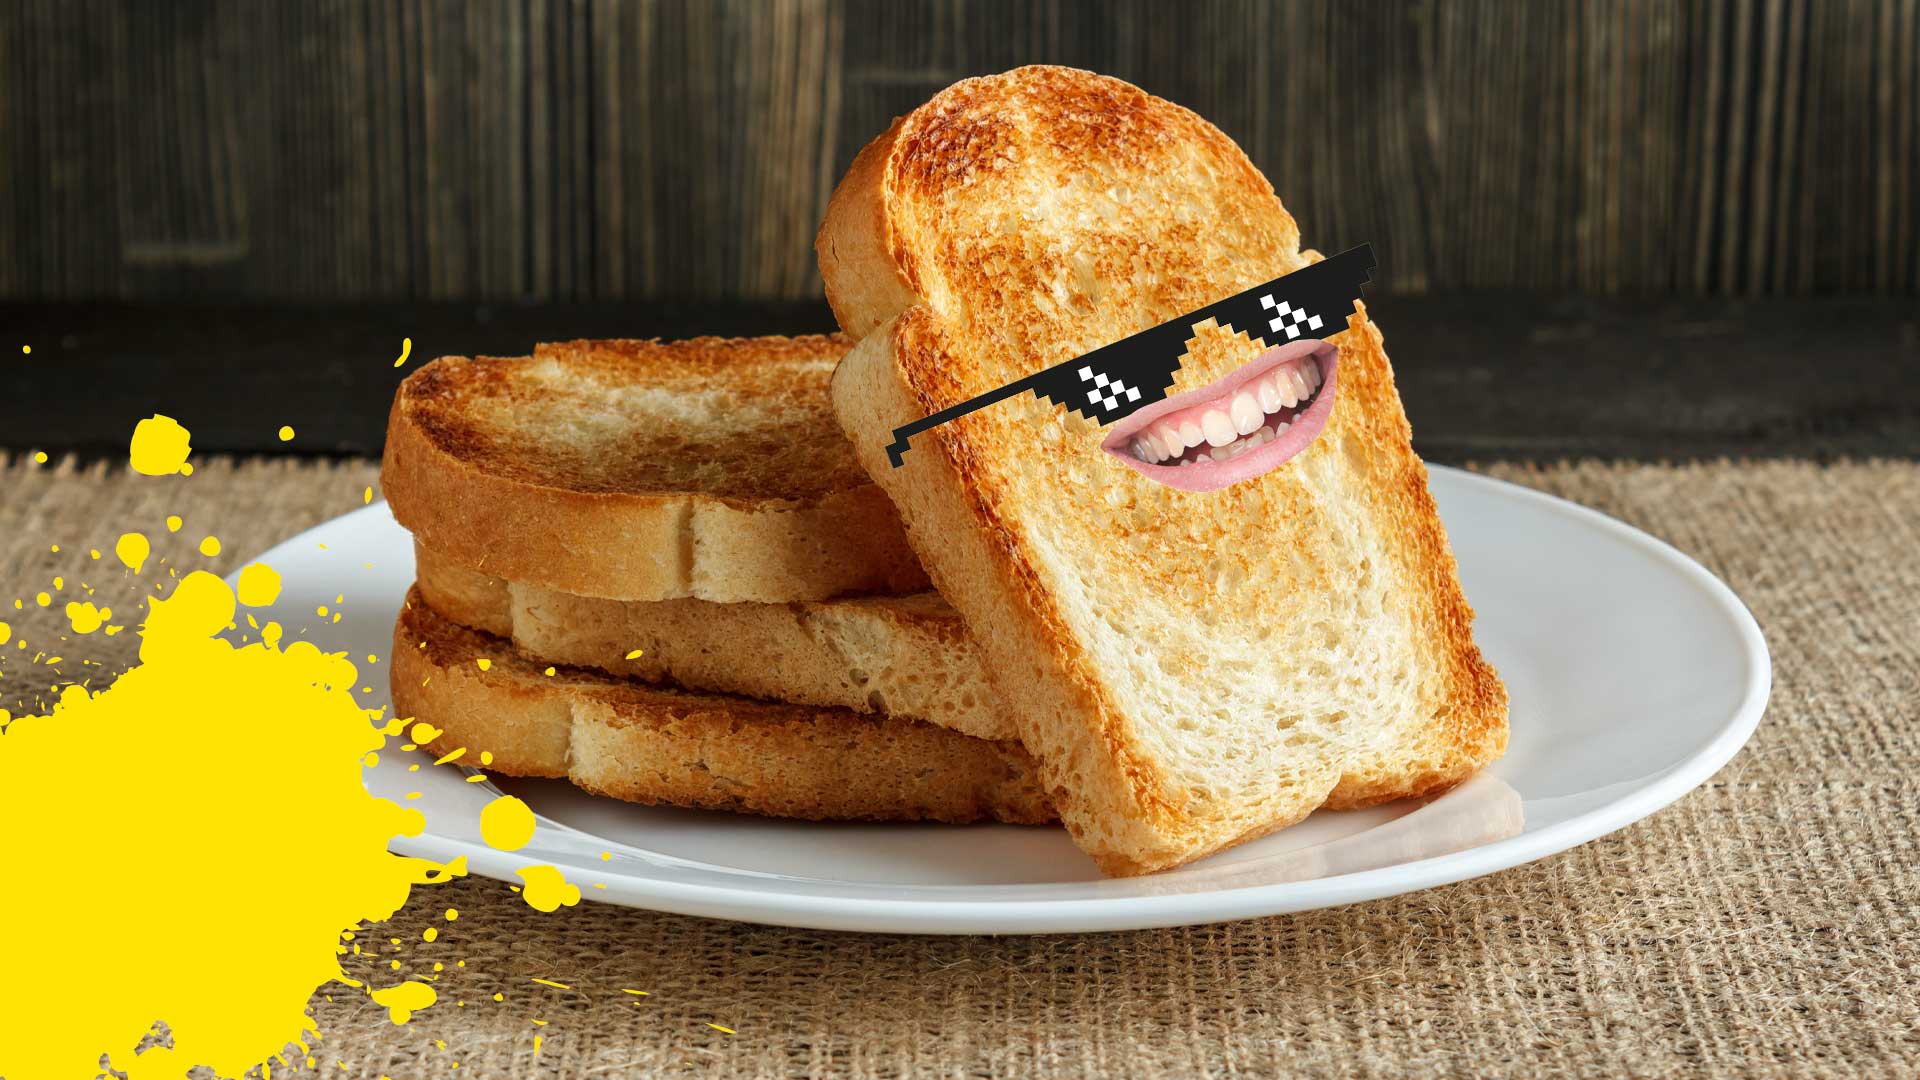 Some laughing toast